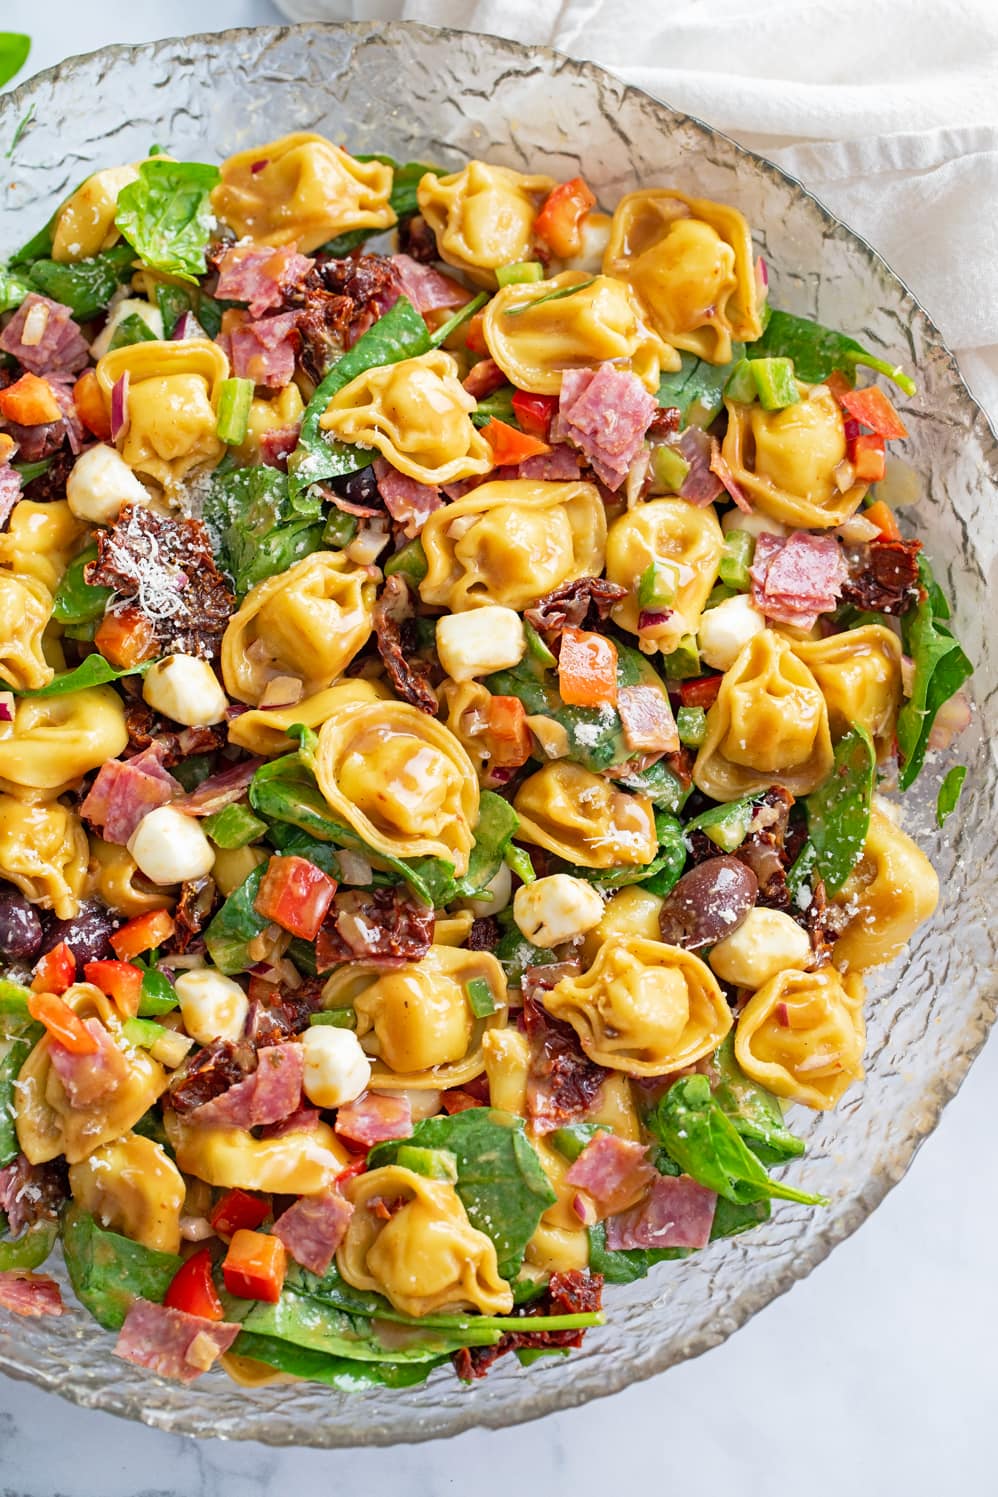 Tortellini Pasta Salad in a glass bowl with spinach, salami, mozzarella, and more.